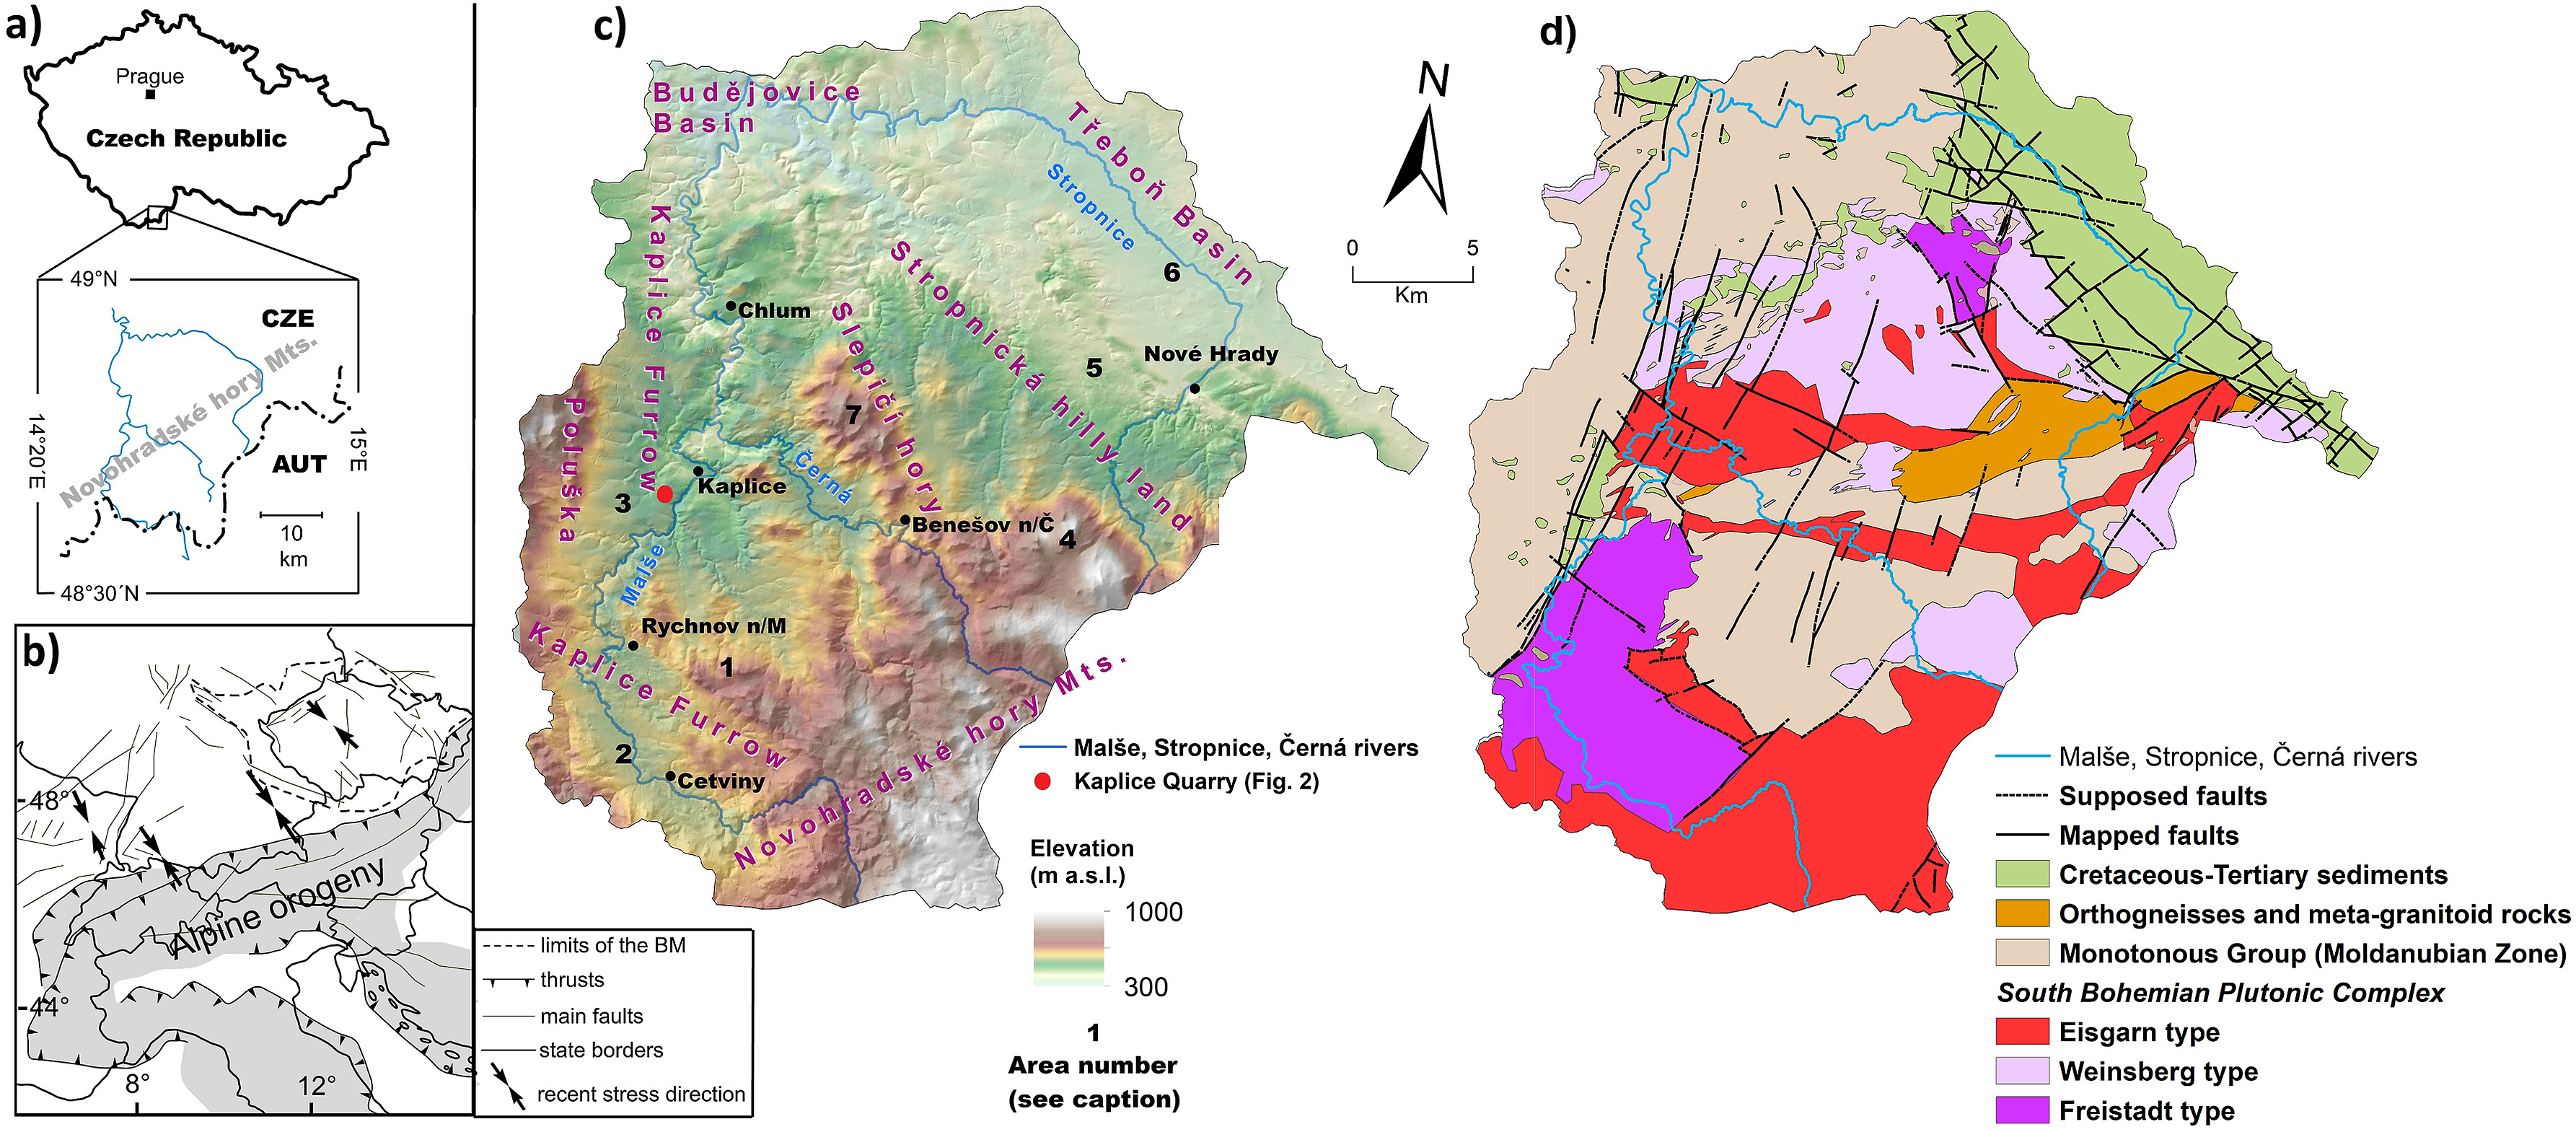 Fig. 1. (a) Location of the study area within the Czech Republic; (b) Location of the Bohemian Massif in relation to the Alpine orogeny and recent stress direction in the area; (c) Topographical map of the study area with linear indications and the areas discussed in detail in text, 1 – Bukovský hřbet Ridge, 2,3 – Kaplice Furrow, 4 – Novohradské hory Mts., 5 – Stropnická vrchovina Highlands, 6 – Třeboň Basin, 7 – Slepičí hory Mts.; (d) Simplified geological map of the study area - catchment of the Malše River. Mapped faults (solid line) and assumed faults (dashed line) adopted from geological maps (Mahel et al., 1984; Slabý and Holásek, 1992a; Slabý and Holásek, 1992b; Vrána and Holásek, 1992; Vrána and Novák, 1993).